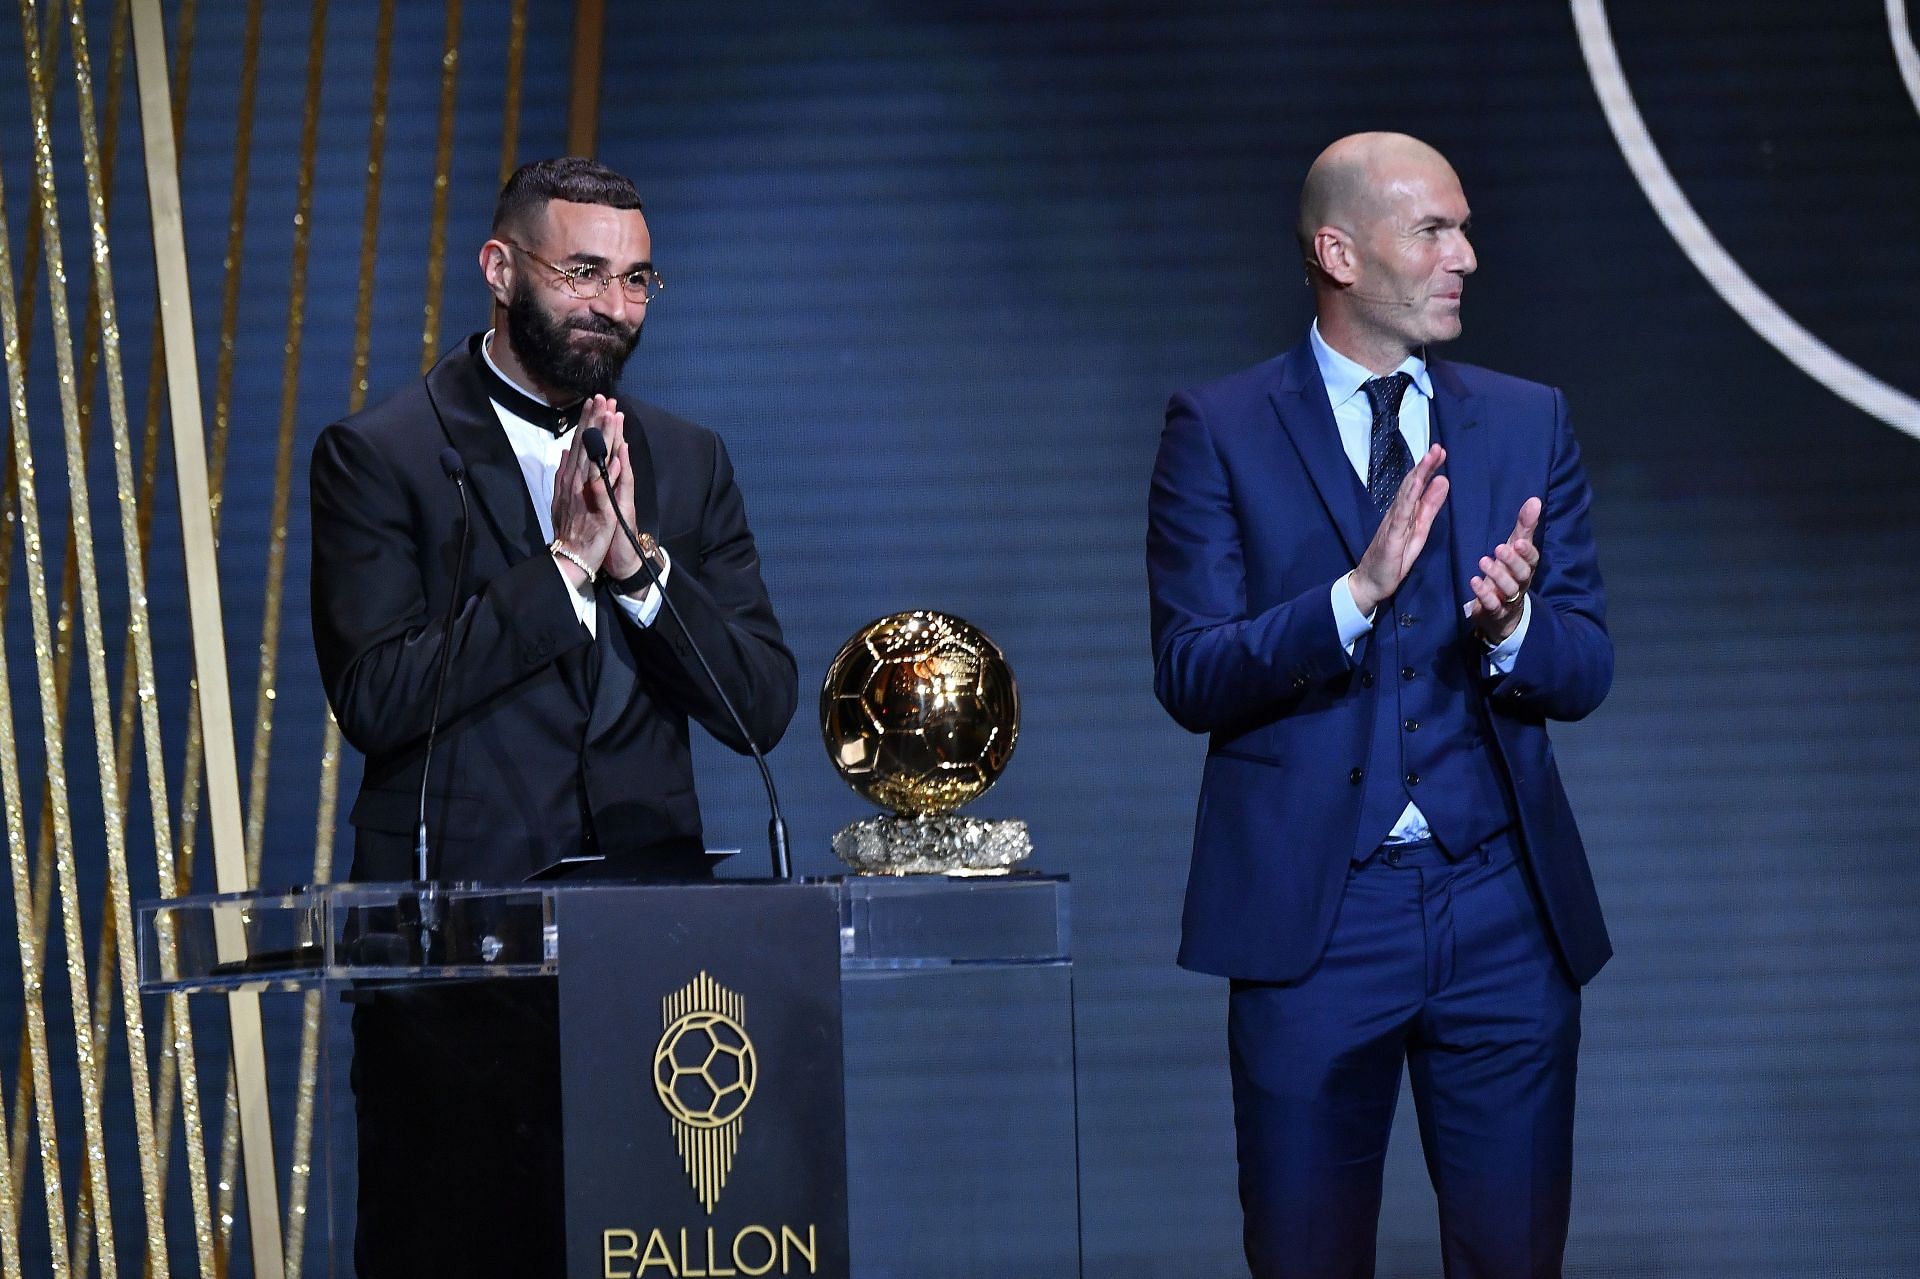 Benzema received the award from his former Real Madrid manager Zidane